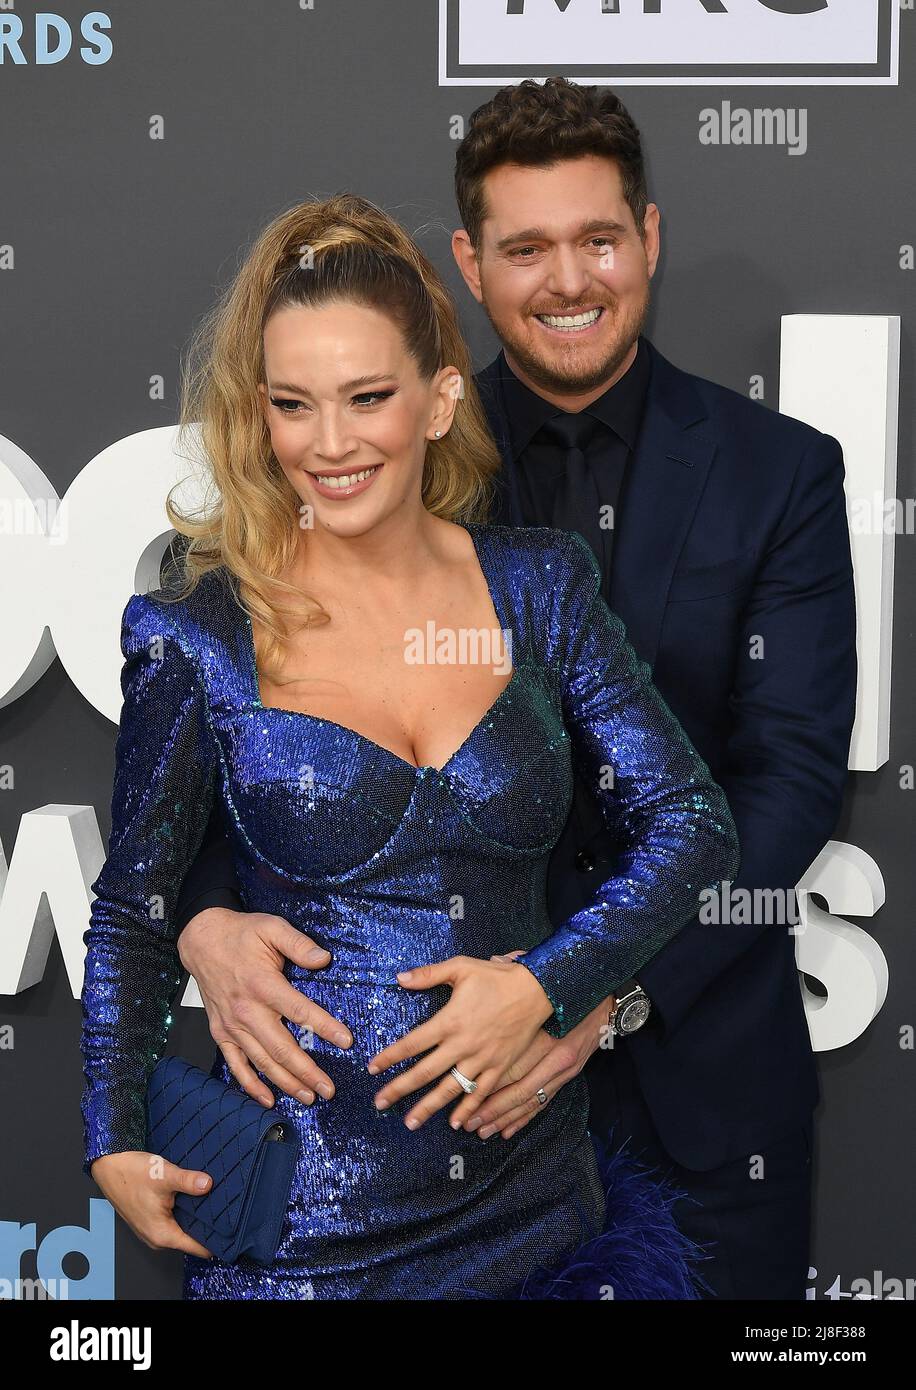 Las Vegas, USA. 15th May, 2022. Michael Buble and Luisana Lopilato attends the 2022 Billboard Music Awards at MGM Grand Garden Arena on May 15, 2022 in Las Vegas, Nevada. Photo: Casey Flanigan/imageSPACE/Sipa USA Credit: Sipa USA/Alamy Live News Stock Photo